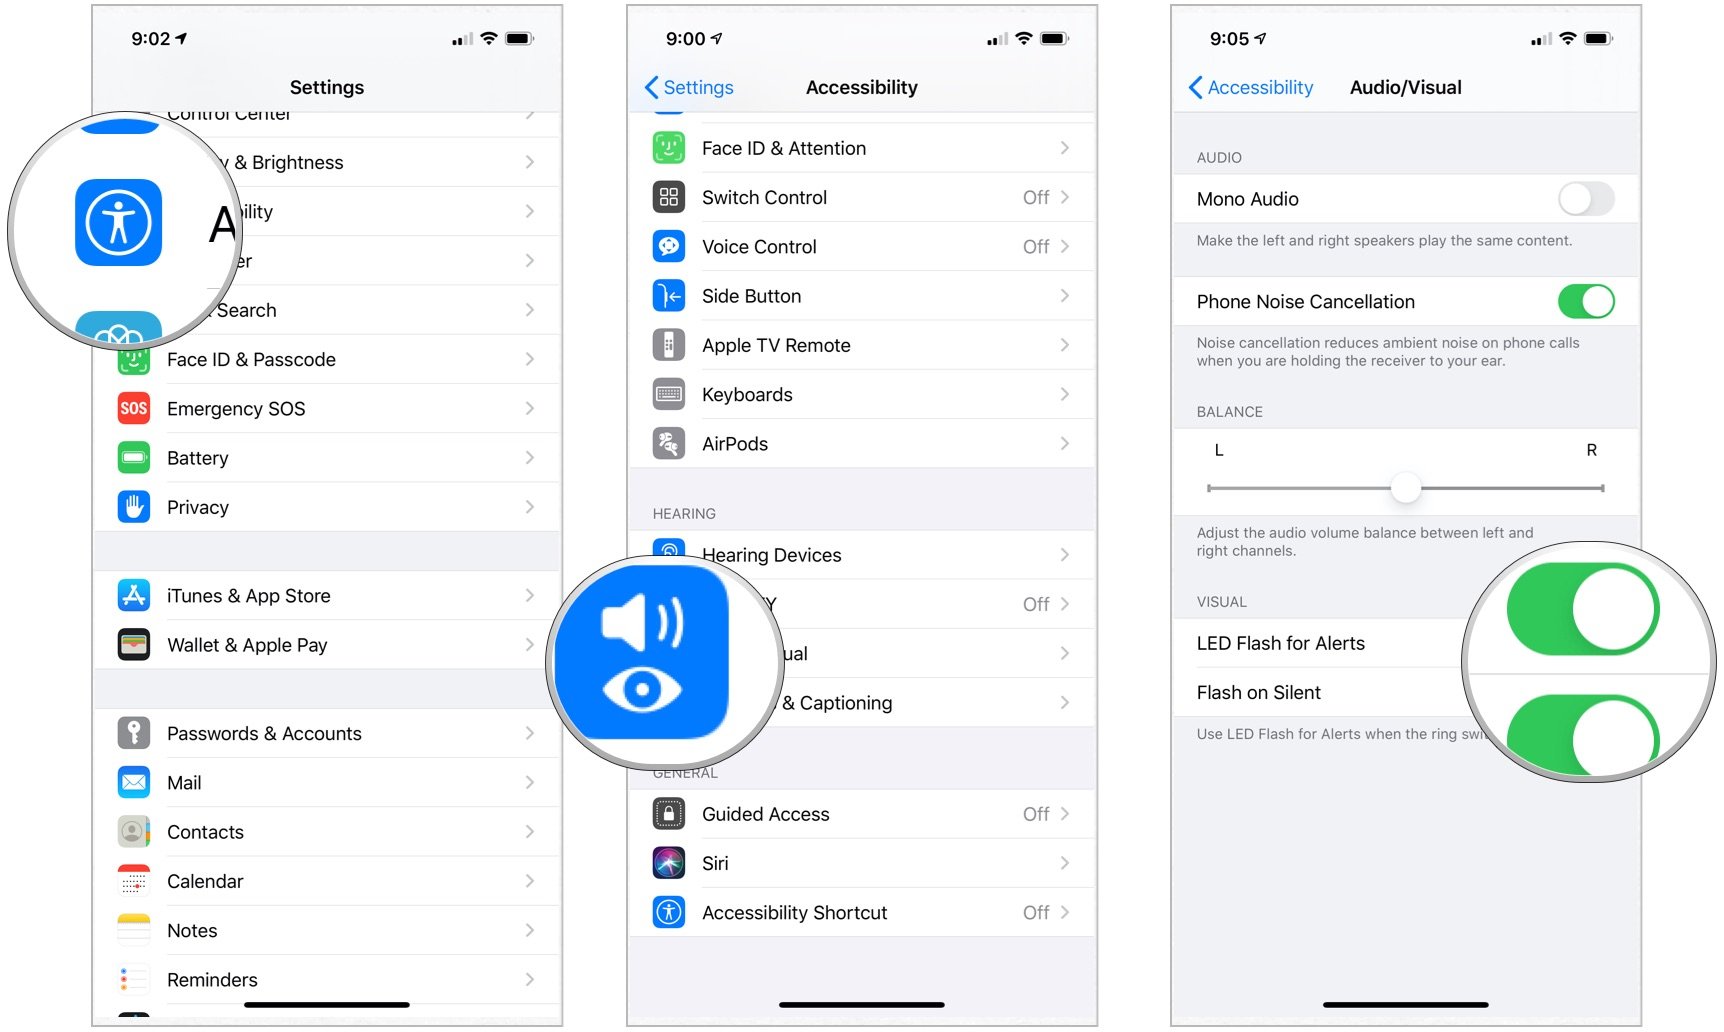 How To Connect Hearing Aids And Use Audio Accessibility On Iphone And Ipad Imore